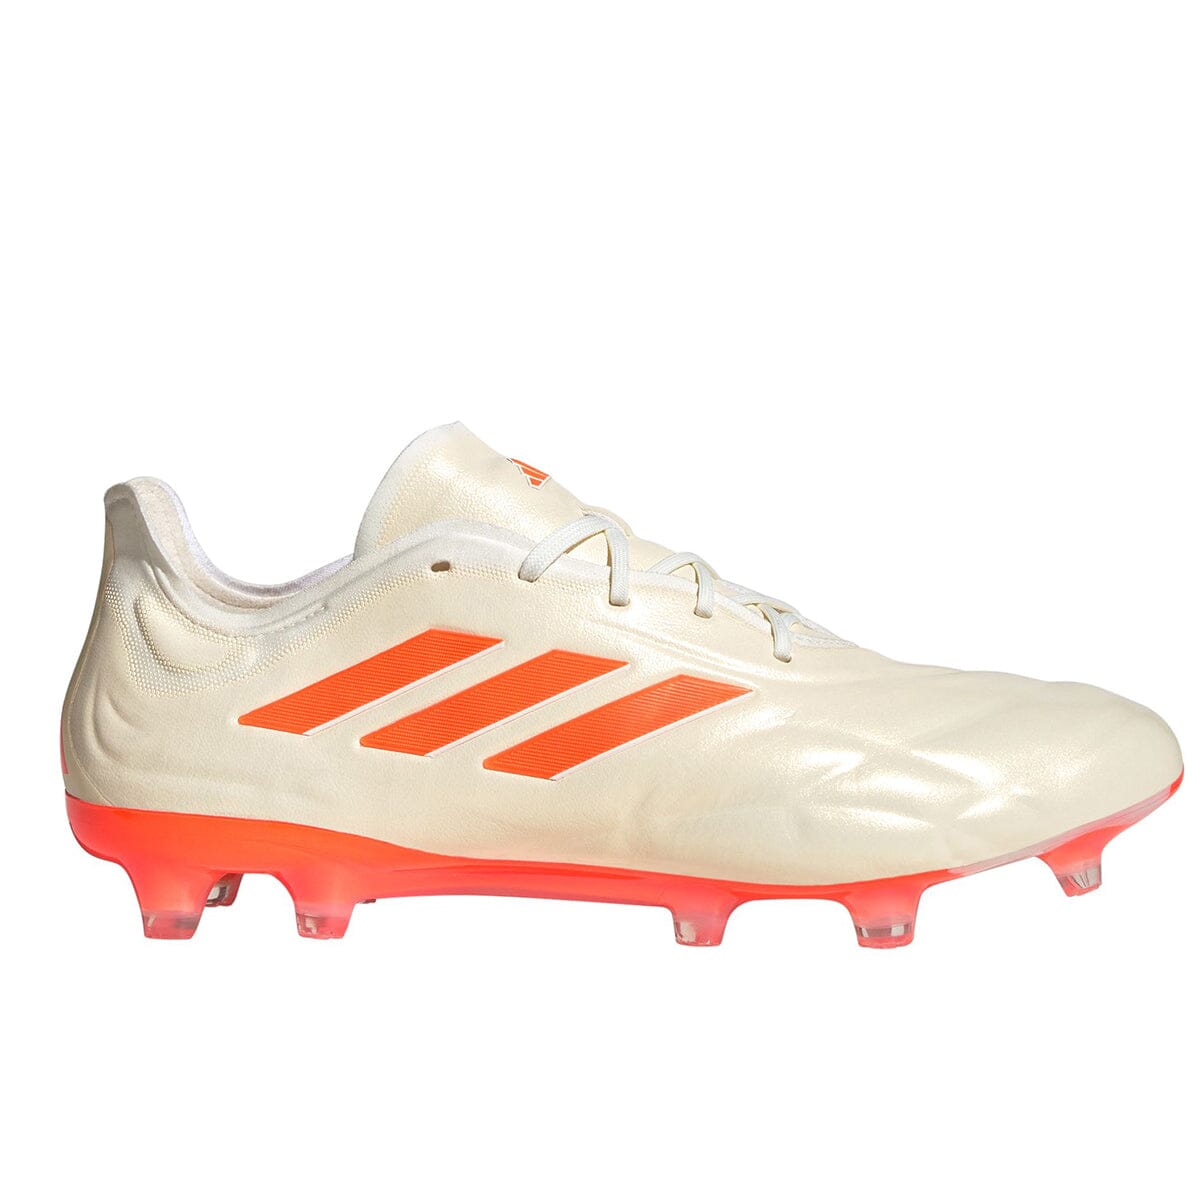 adidas Unisex Copa Pure.1 FG Soccer Cleats | HQ8903 Cleats Adidas 8 Off White / Team Solar Orange / Off White 